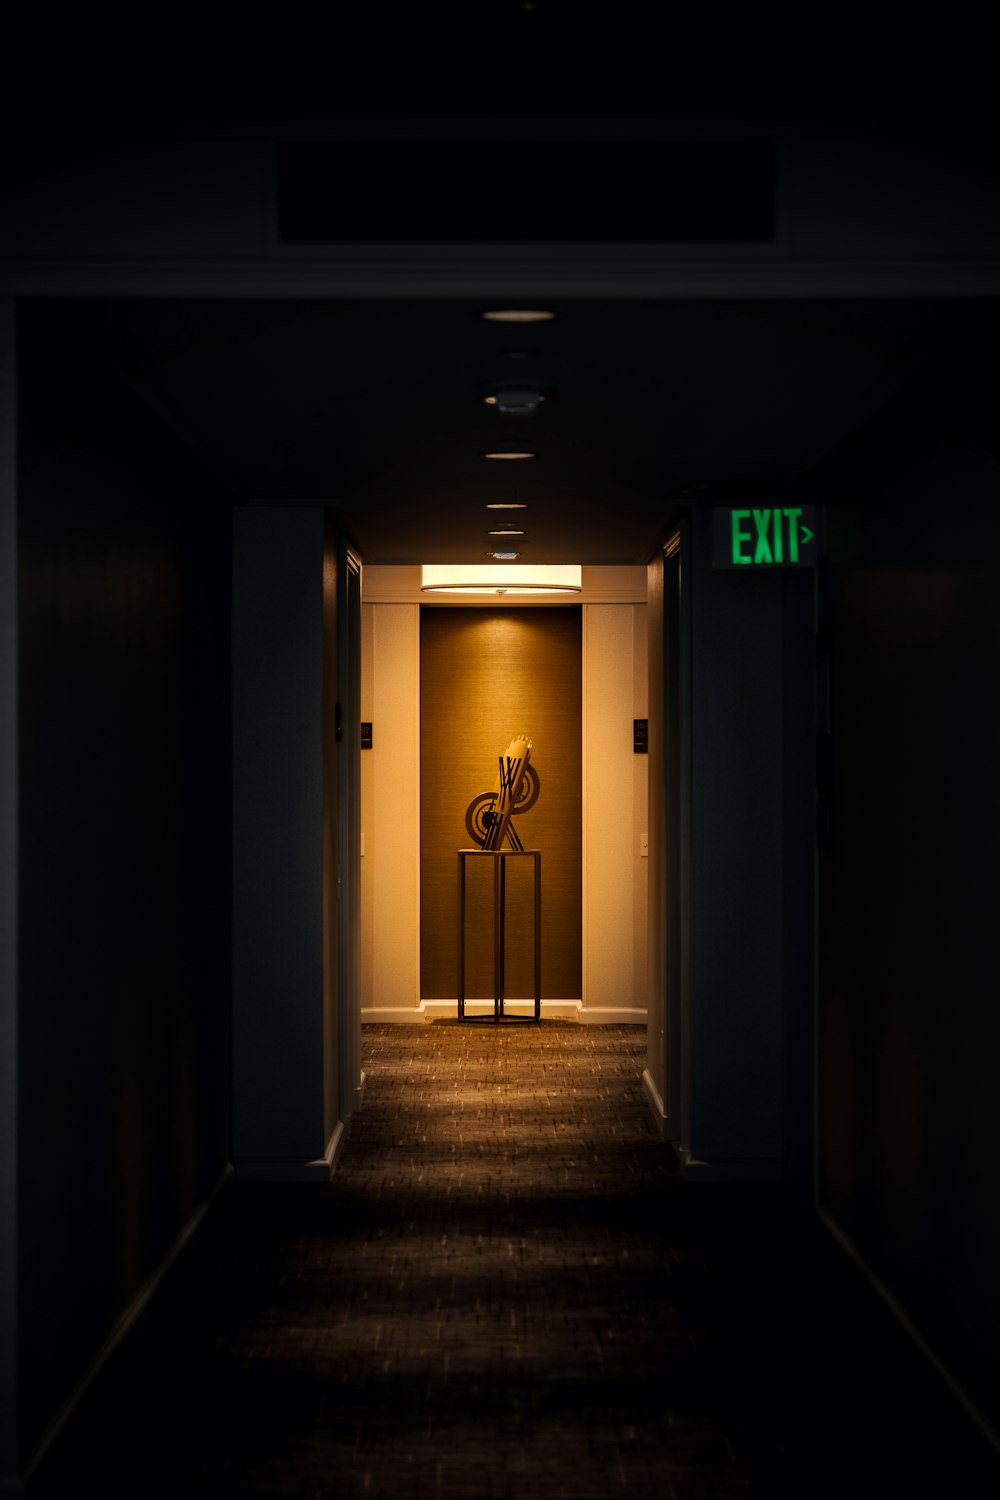 a dark hallway with a exit sign on the wall